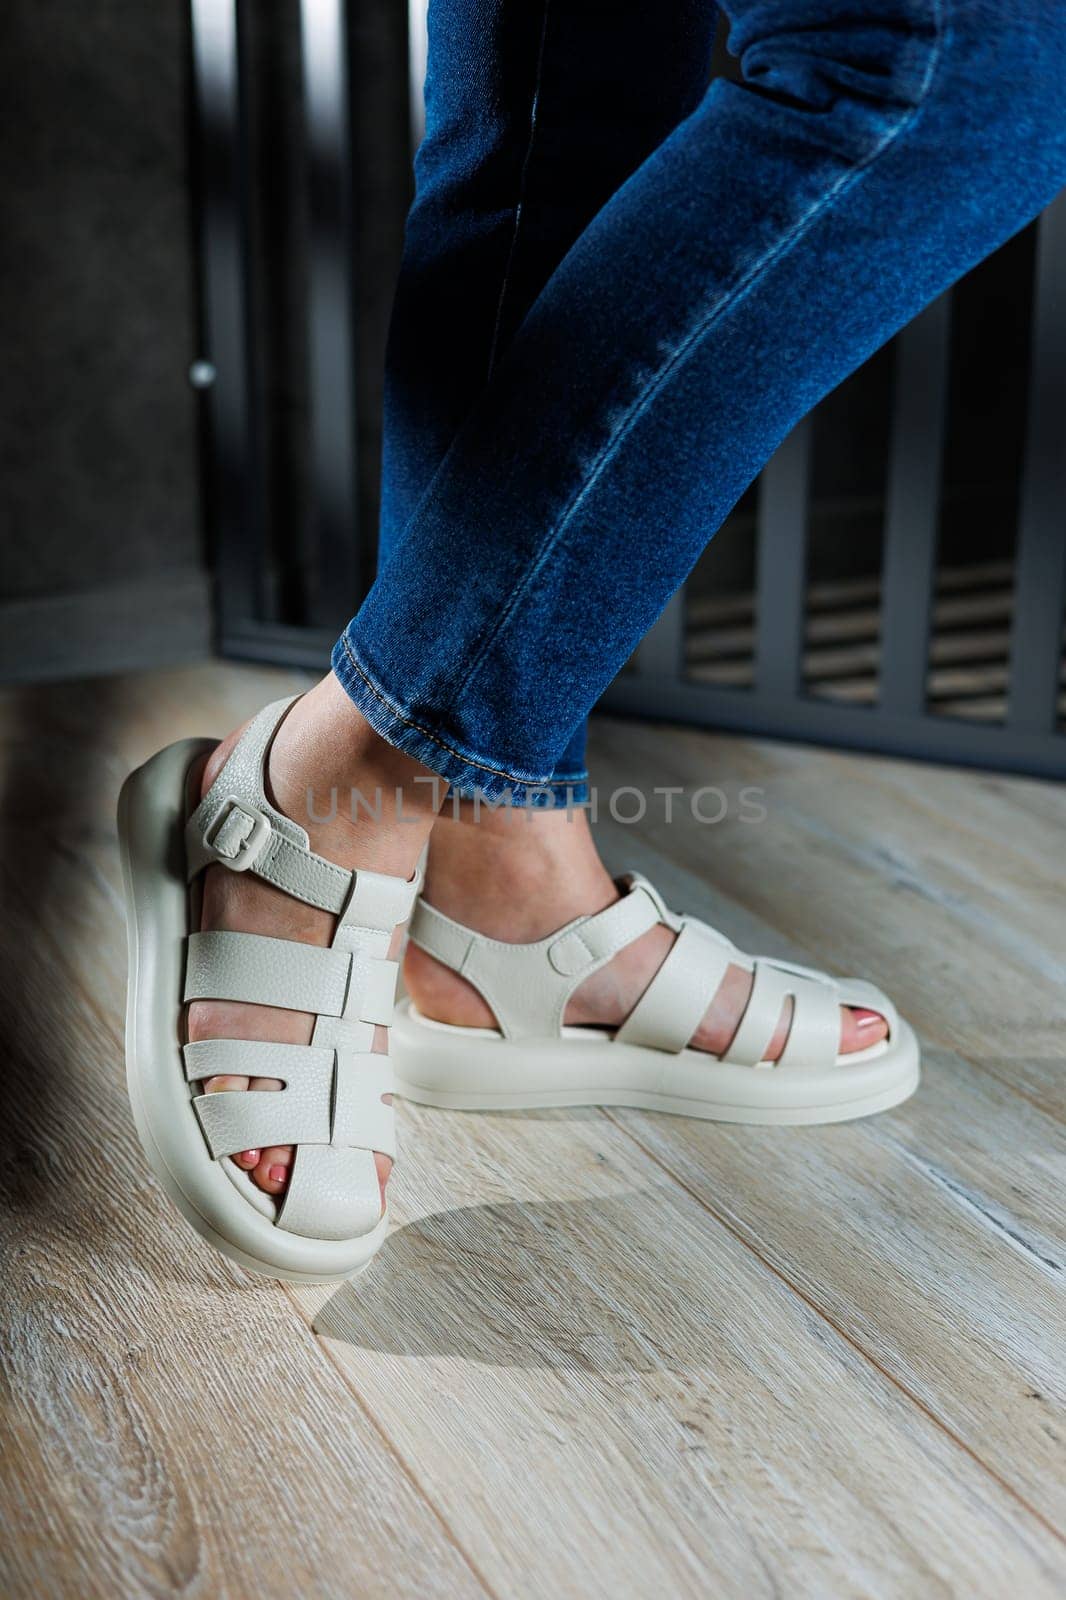 Slender female legs in beige leather sandals without heels. Collection of women's summer sandals.